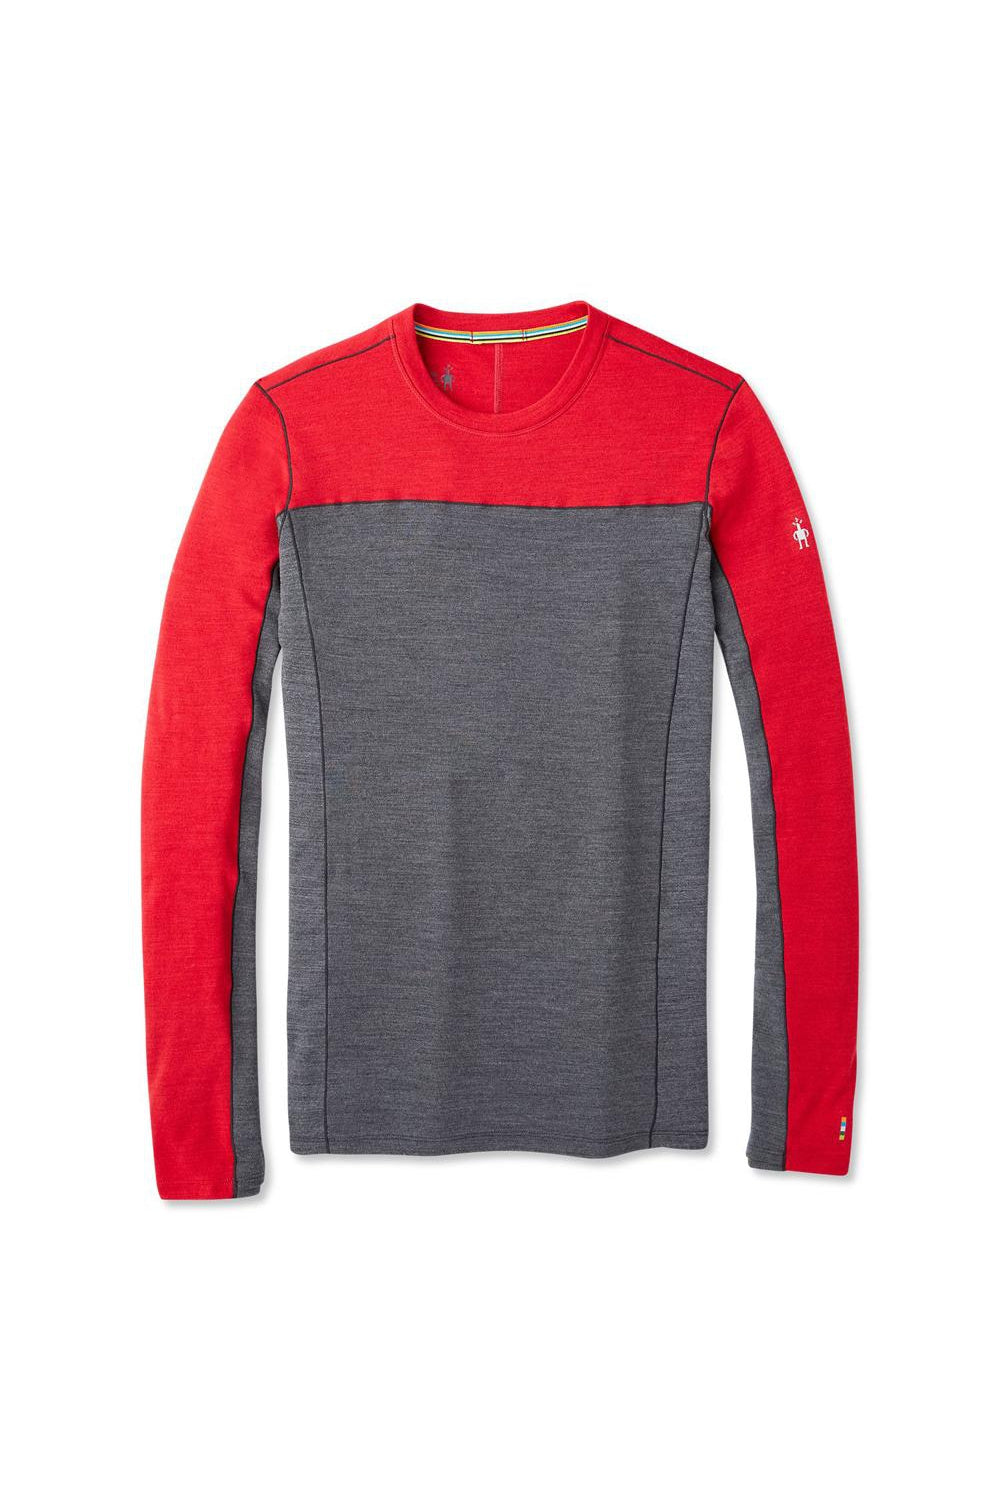 Men's Smartwool Merino Sport 250 Long Sleeve Crew Shirt in Chili Pepper Heather from the front